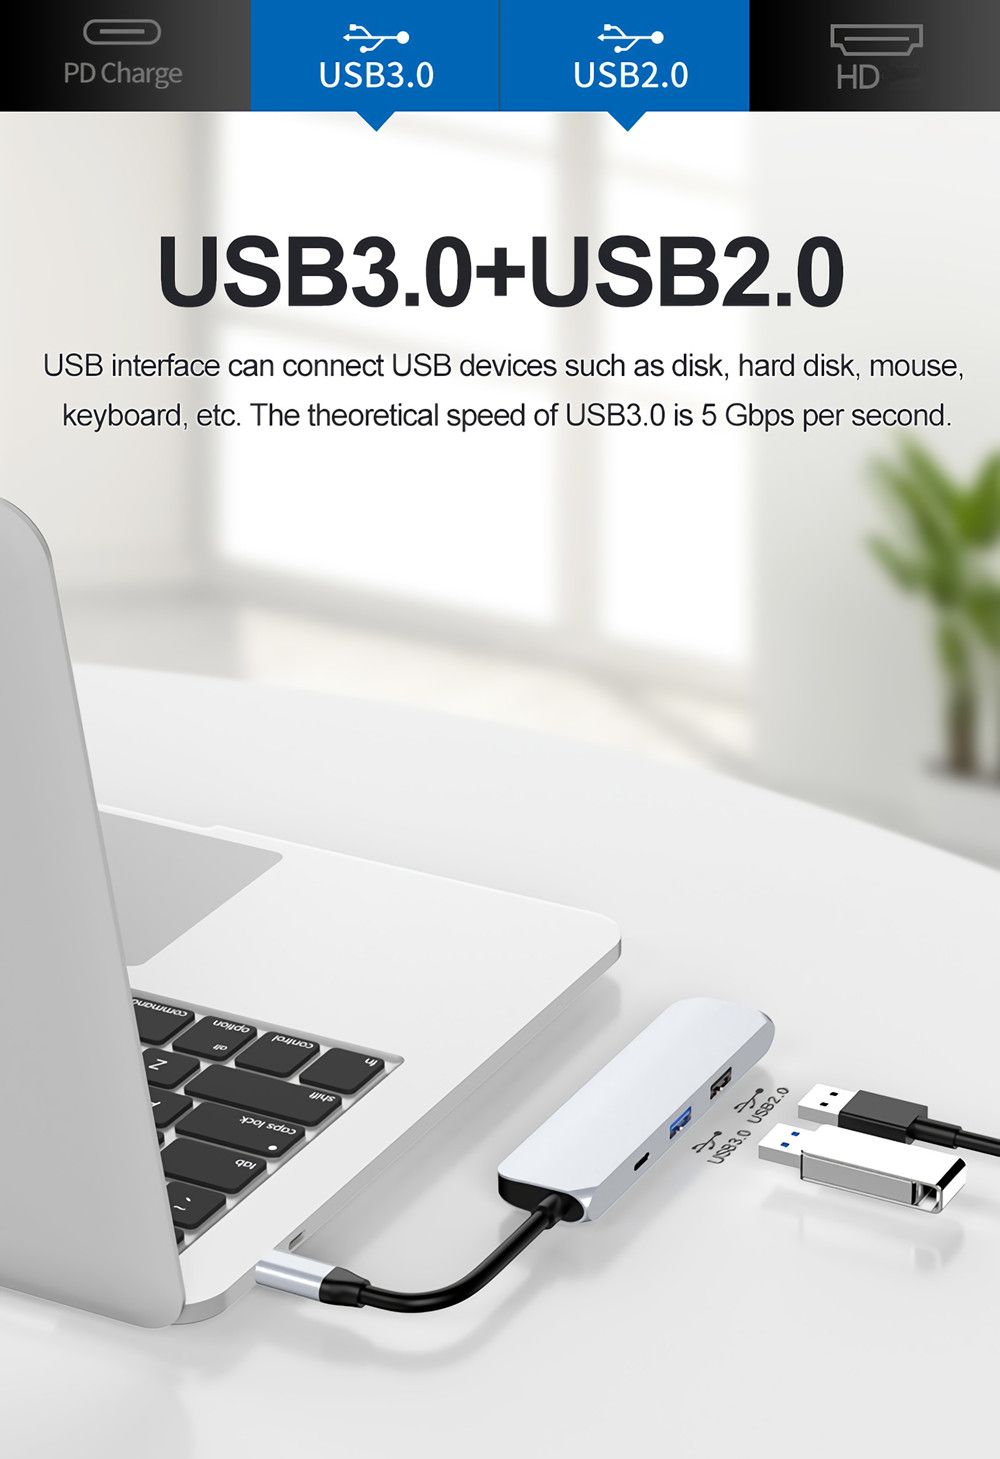 HW-TC41-4-in-1-USB-Type-C-Data-HUB-Adapter-with-USB-30-USB-20-4K-HD-PD-Charging-for-Tablet-Laptop-1664903